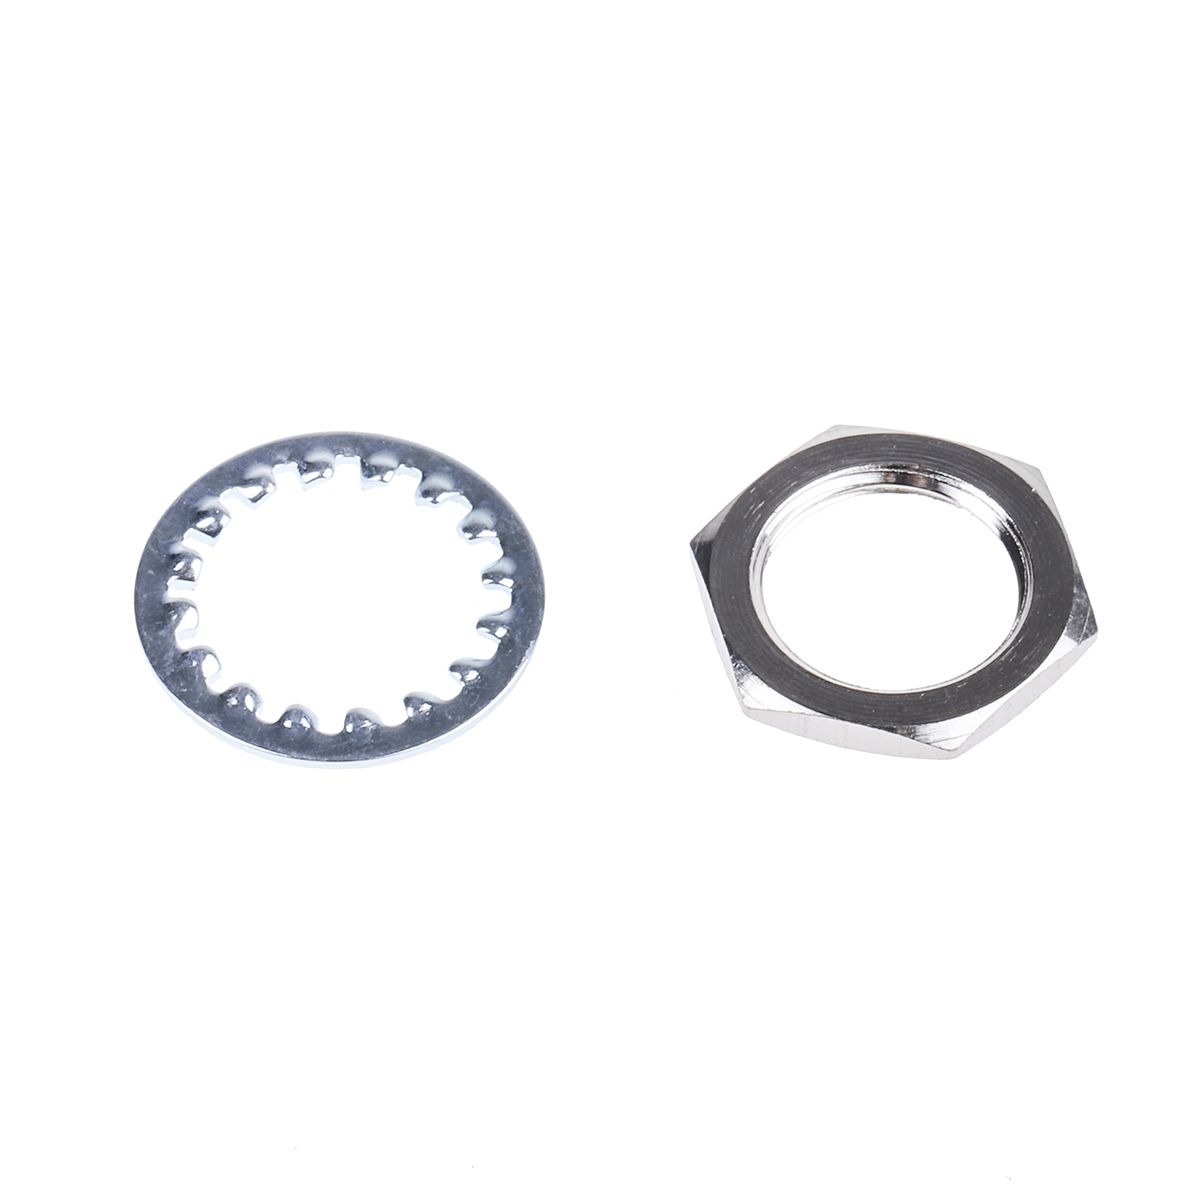 Broadcom Steel Hex Half Nut and Washers with Internal Tooth, 200 Pieces